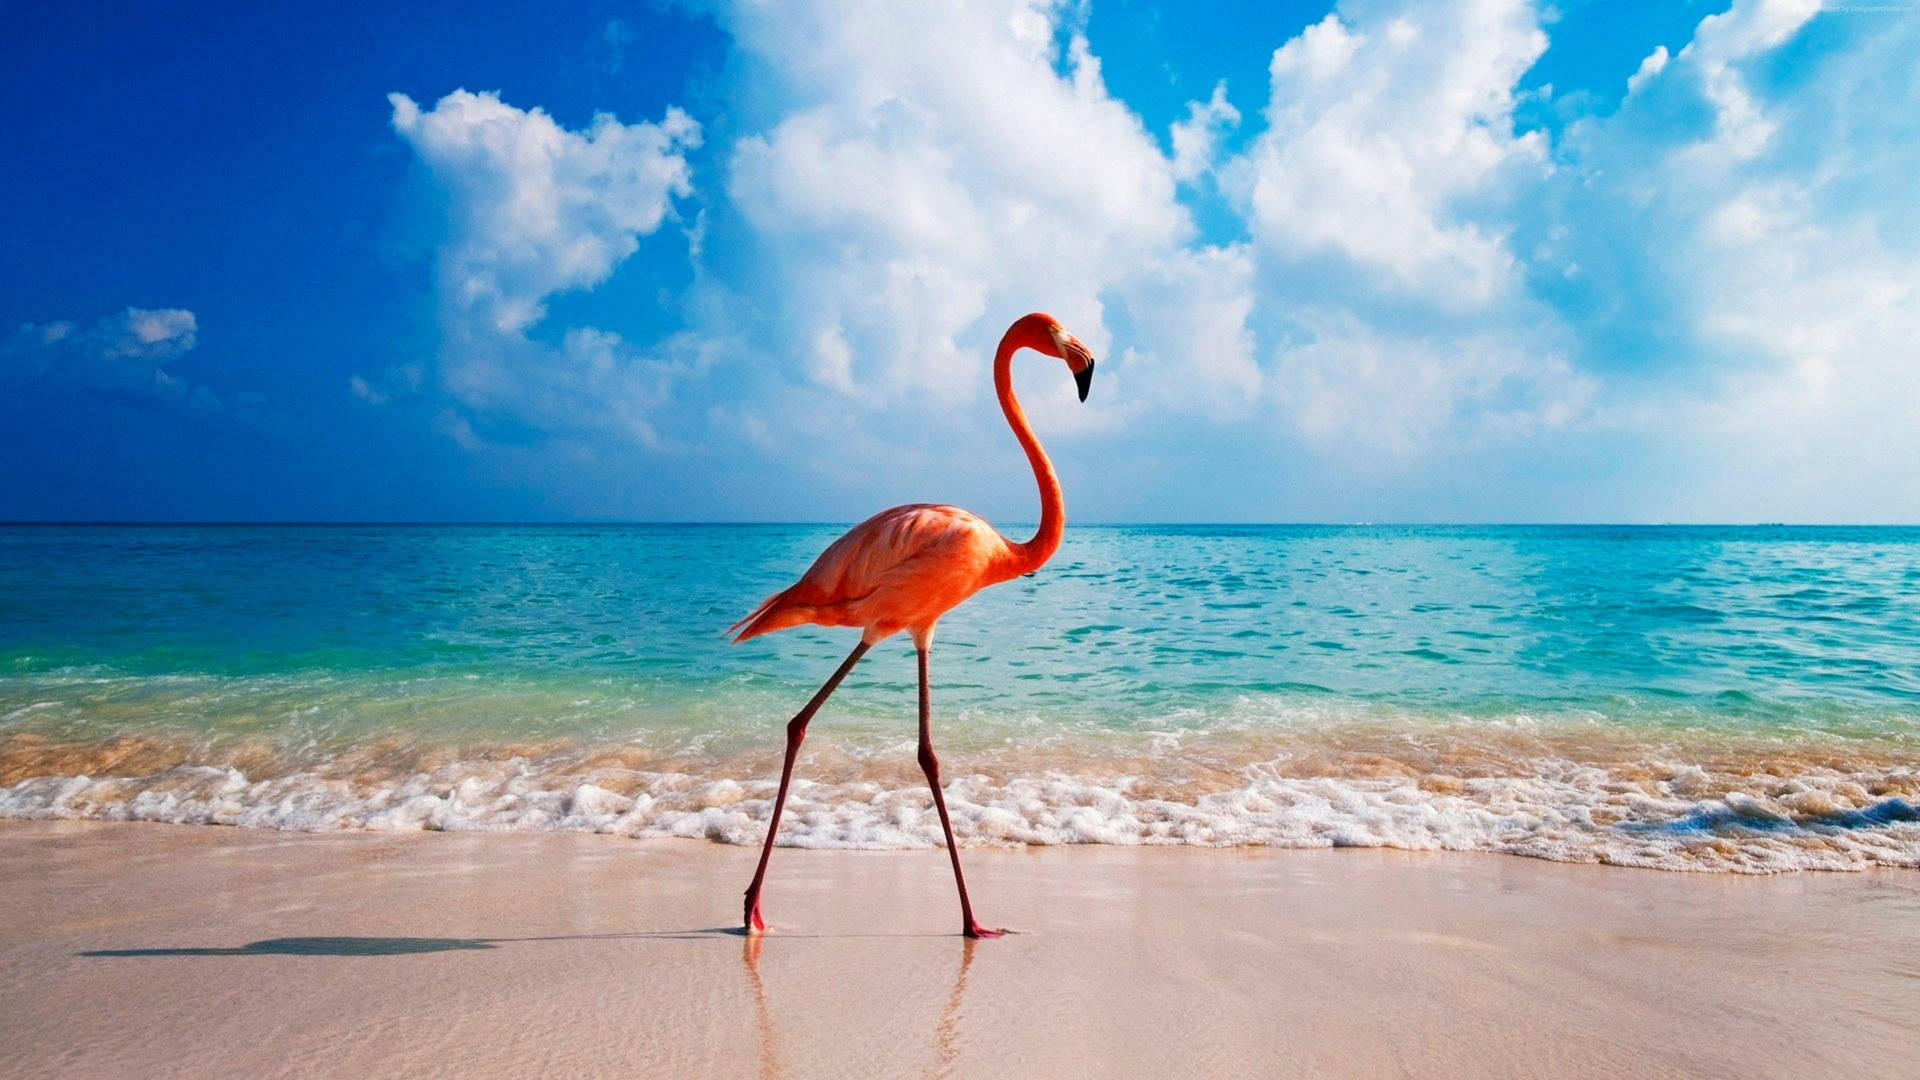 Spend an Unforgettable Day at the Beach with Lovely Flamingos Wallpaper